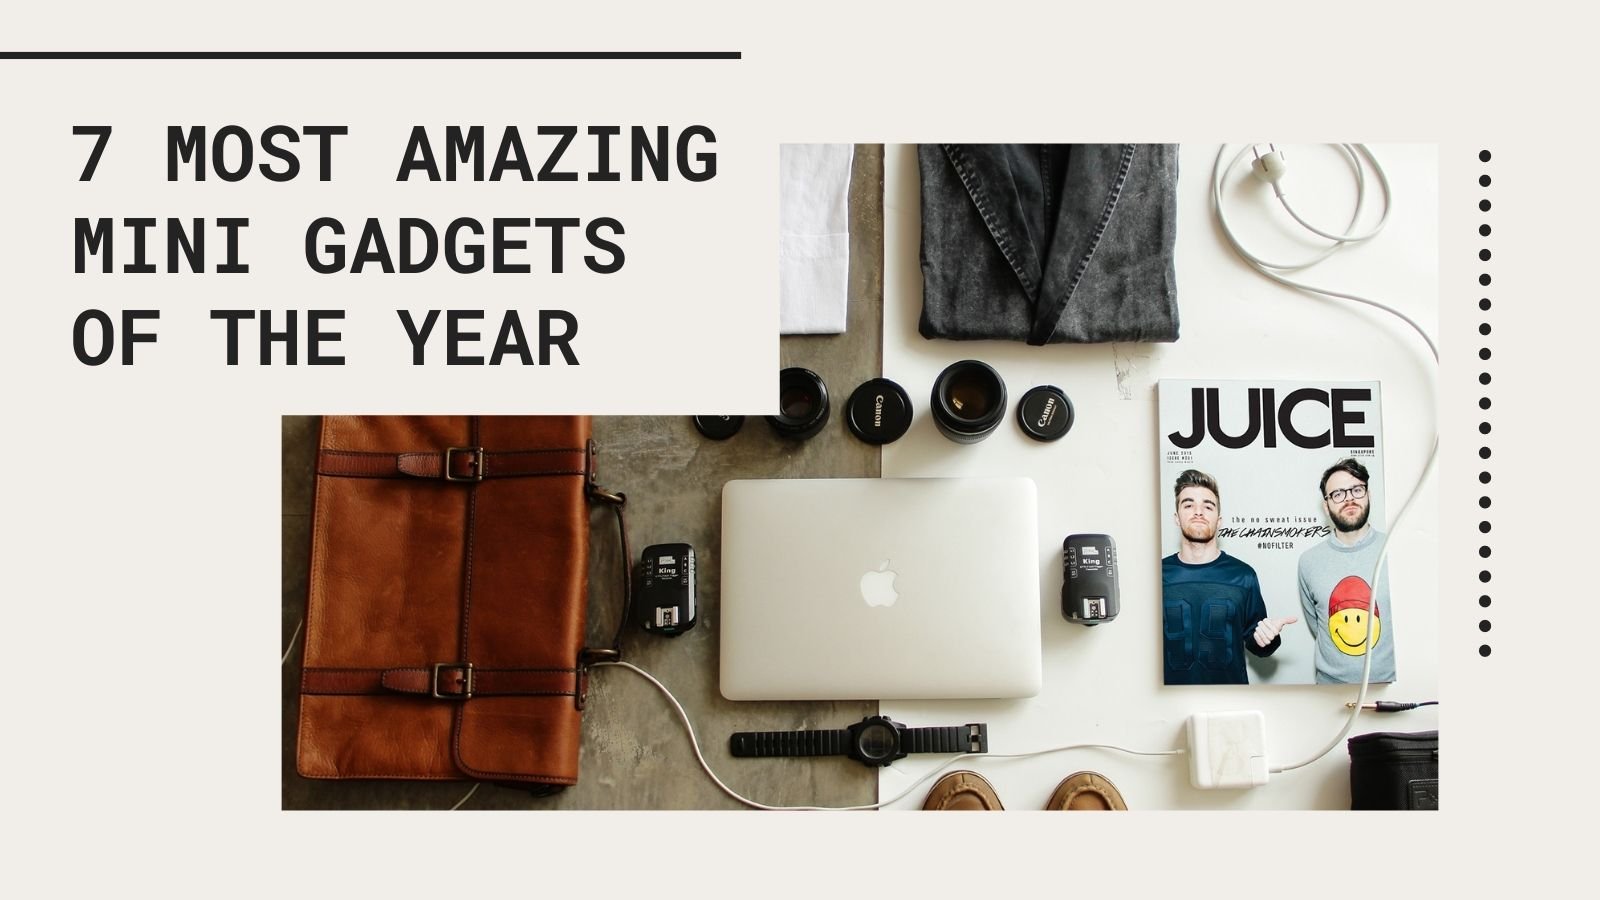 7 Most Amazing Mini Gadgets Of The Year